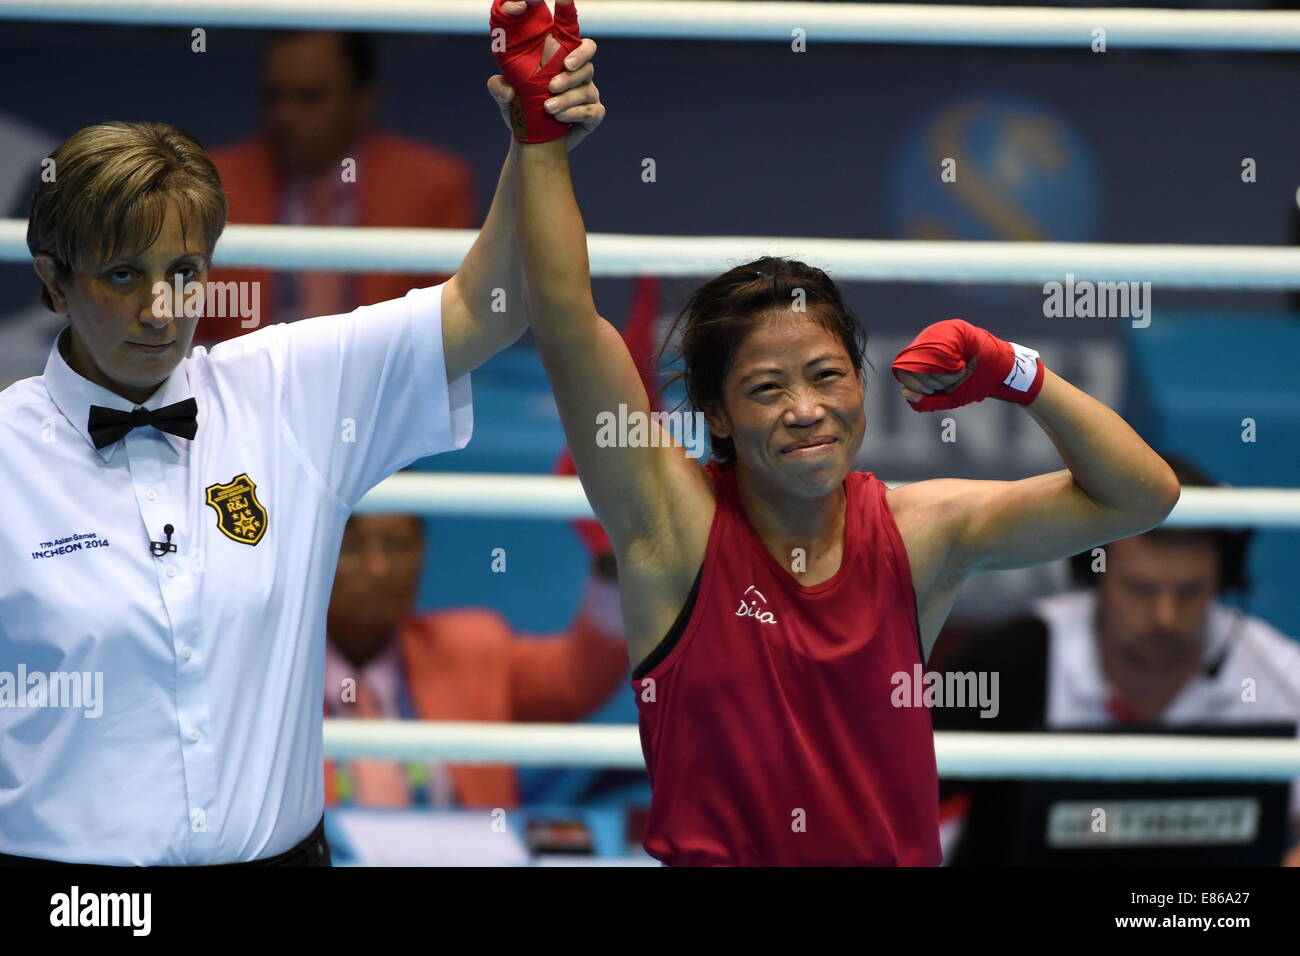 Incheon, South Korea. 1st Oct, 2014. Hmangte Kom (R) of India is announced the winner of the women's light 48-51kg contest of boxing at the 17th Asian Games in Incheon, South Korea, Oct. 1, 2014. Hmangte Kom defeated Shekerbekova Zhaina of Kazakhstan 2-0 and claimed the title. Credit:  Gao Jianjun/Xinhua/Alamy Live News Stock Photo